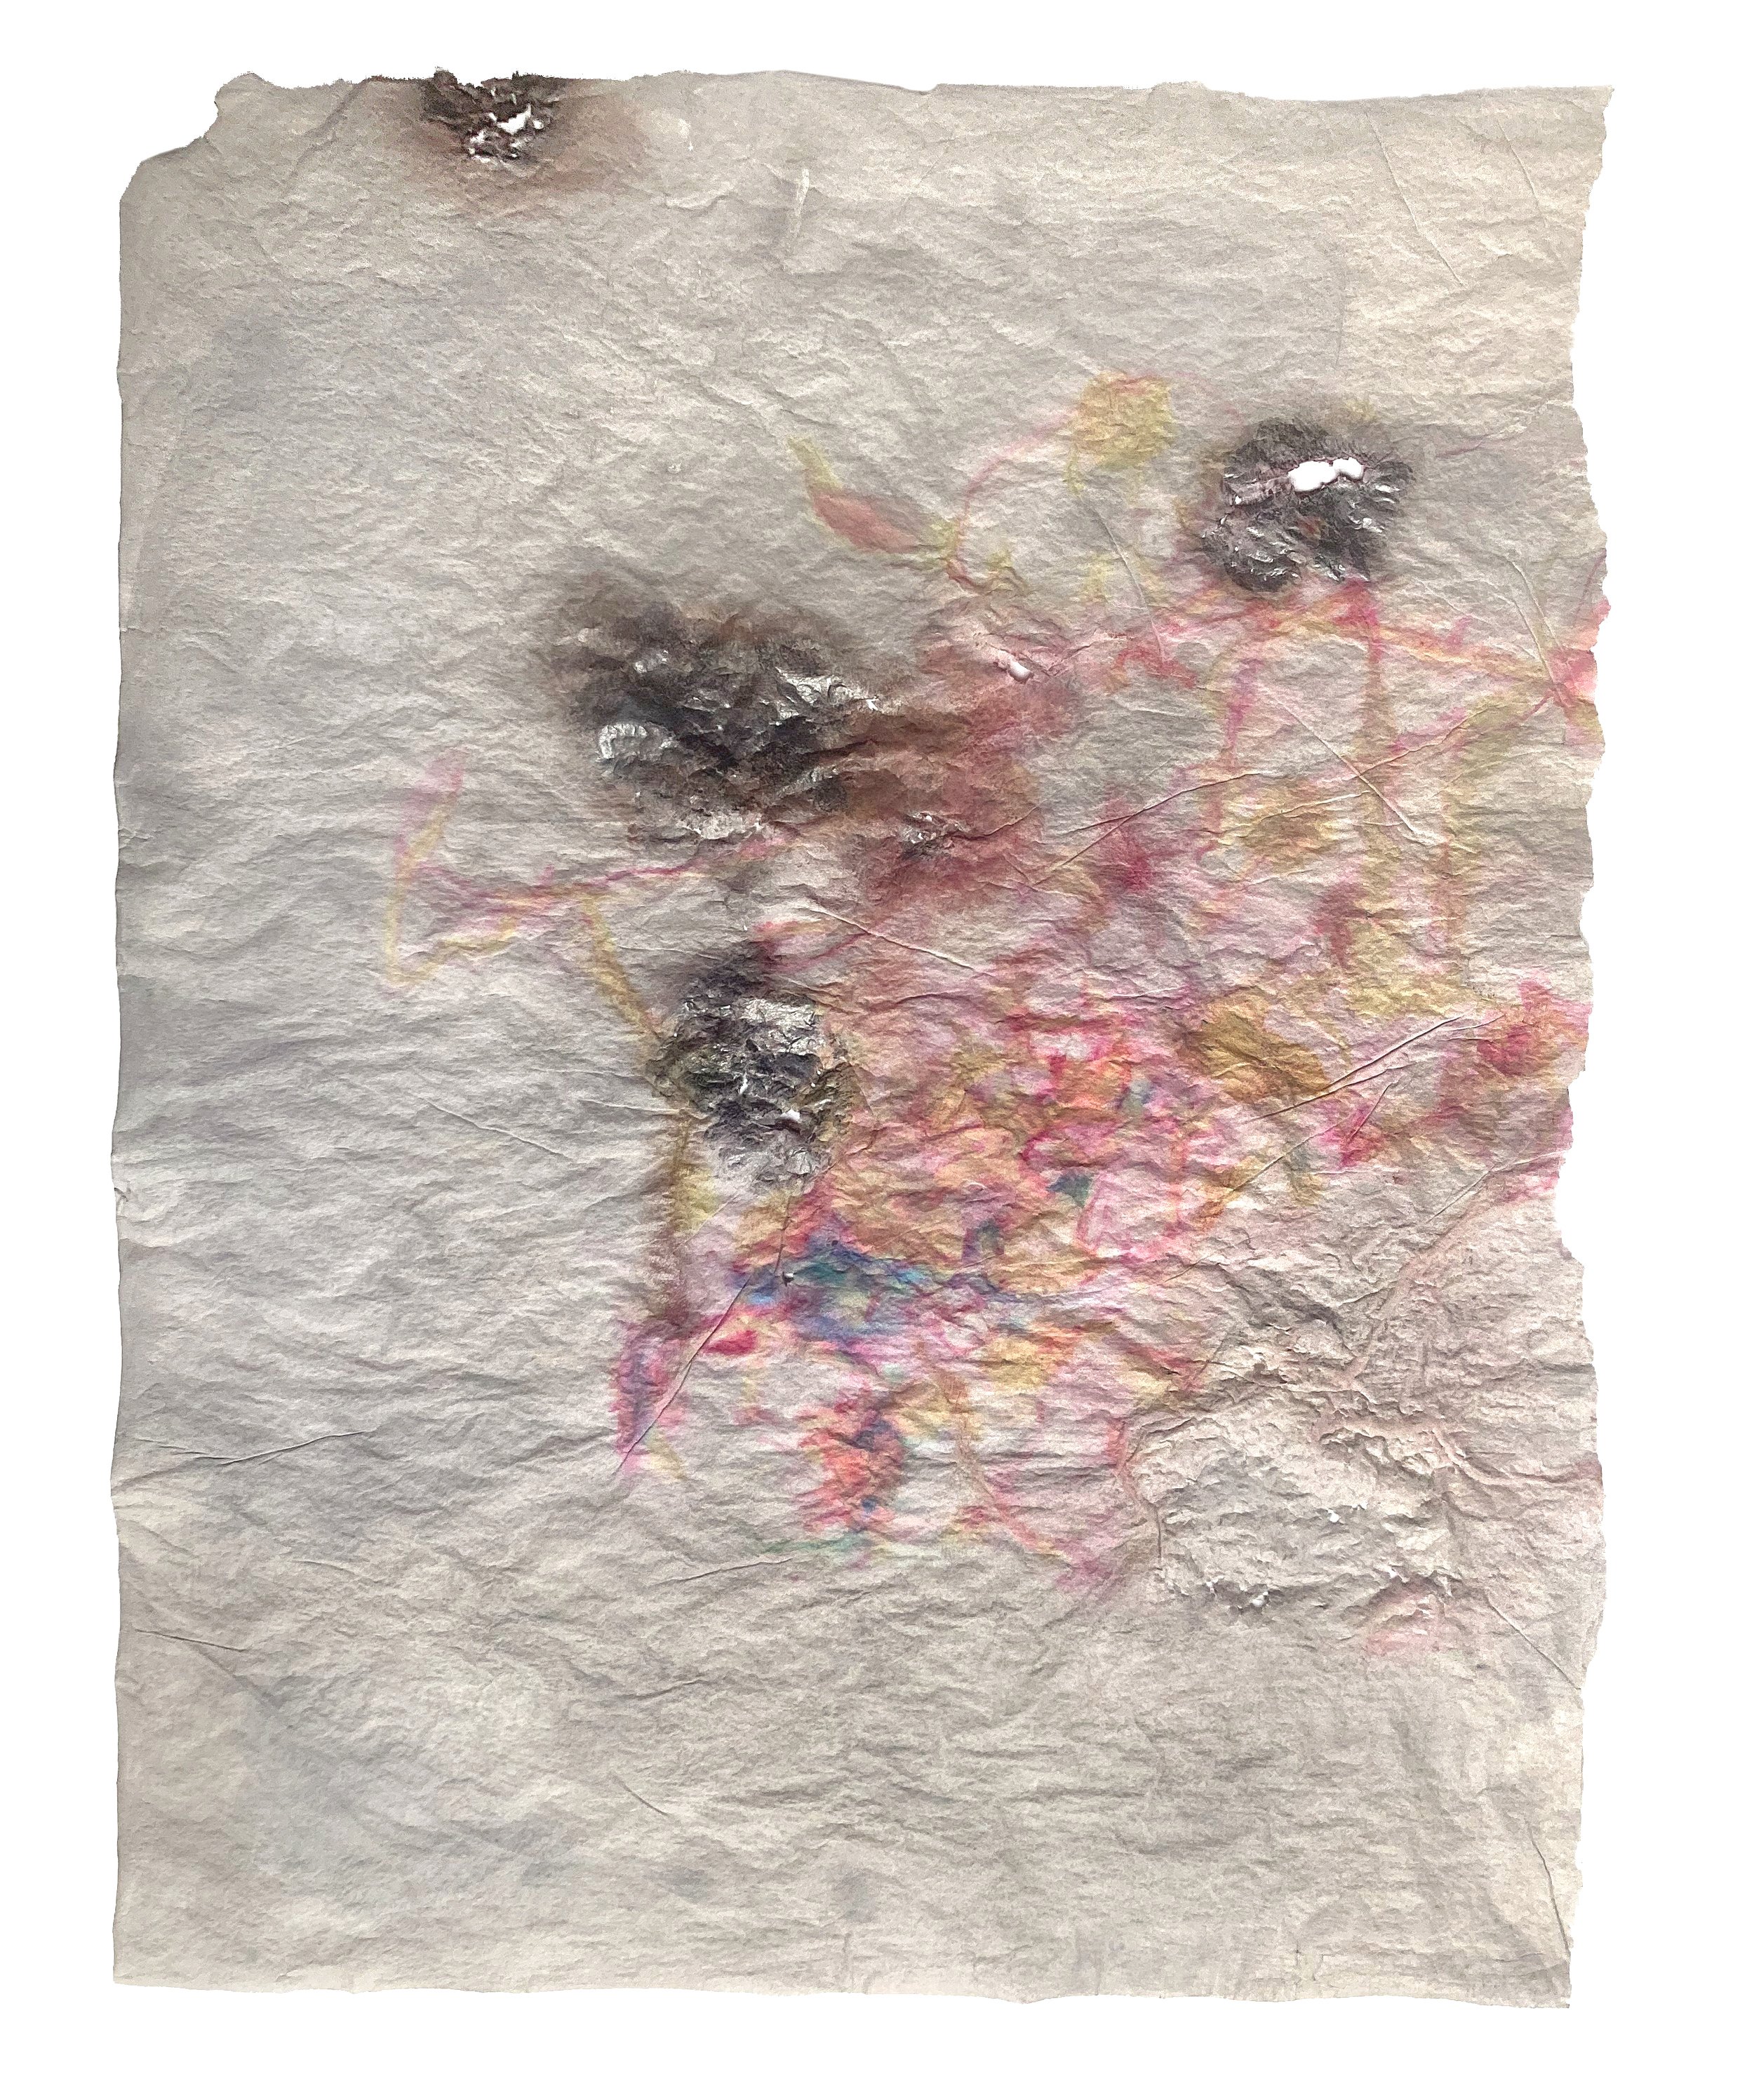 Untitled. 2023. Graphite, pastel, aquarelle on tracing paper